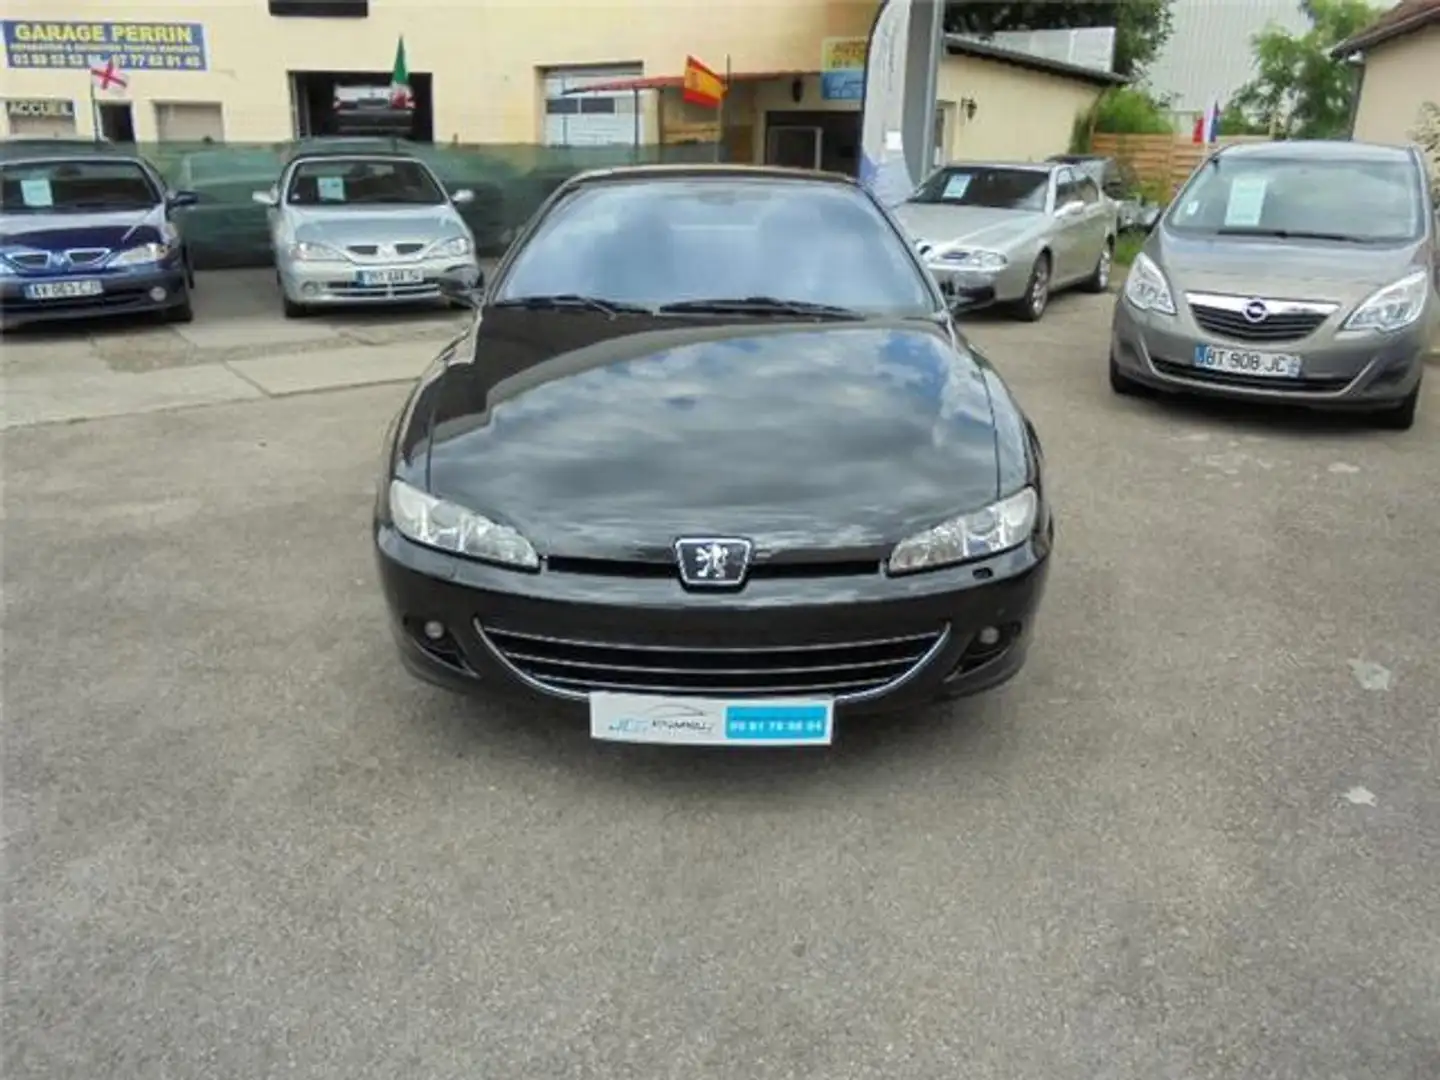 Peugeot 406 COUPE 2.2 HDI136 GRIFFE crna - 2